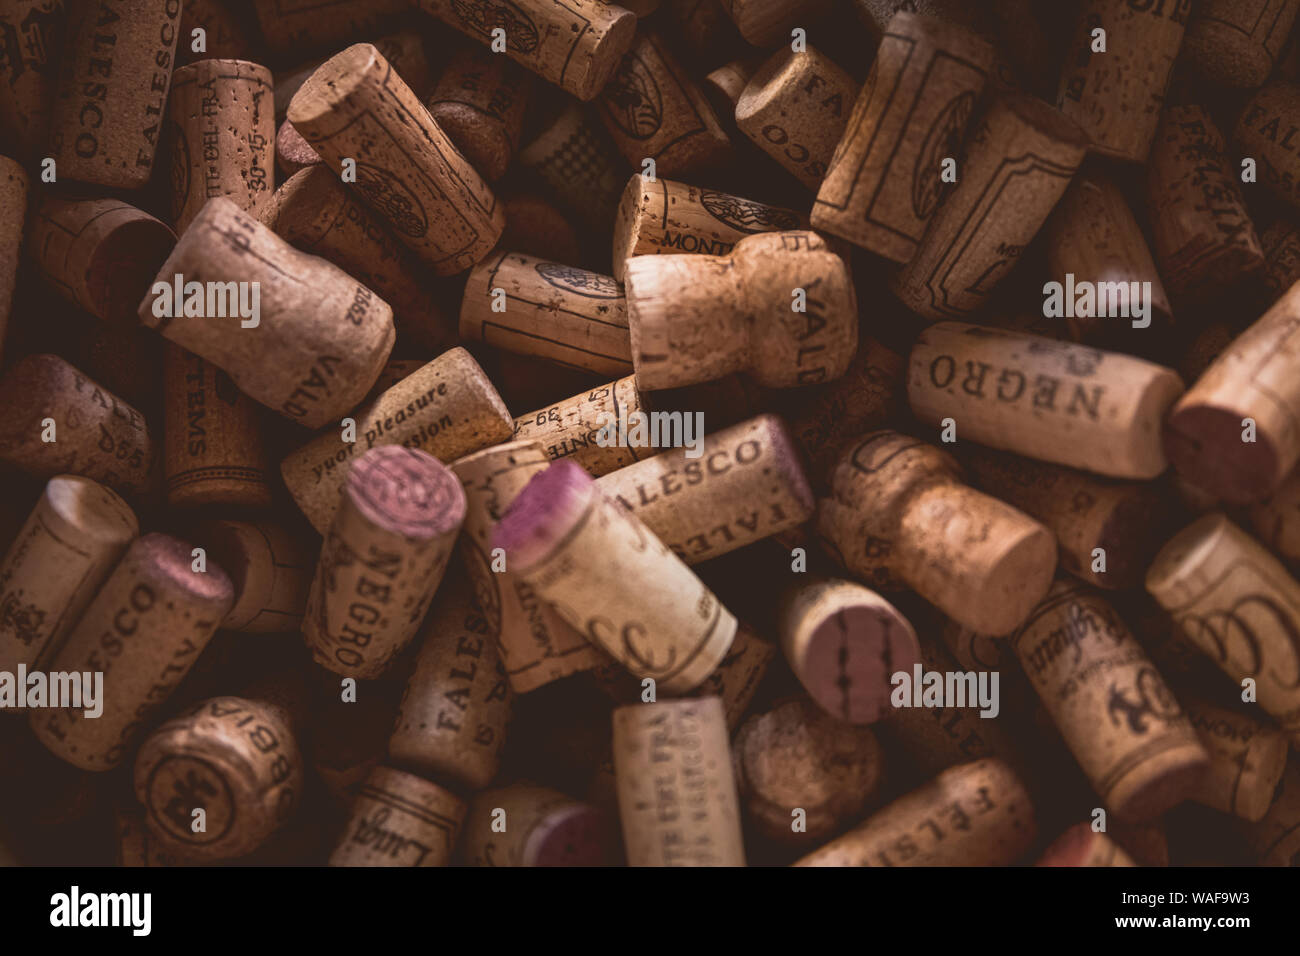 A collection of used Italian wine corks with red wine staining on some of the corks. Stock Photo